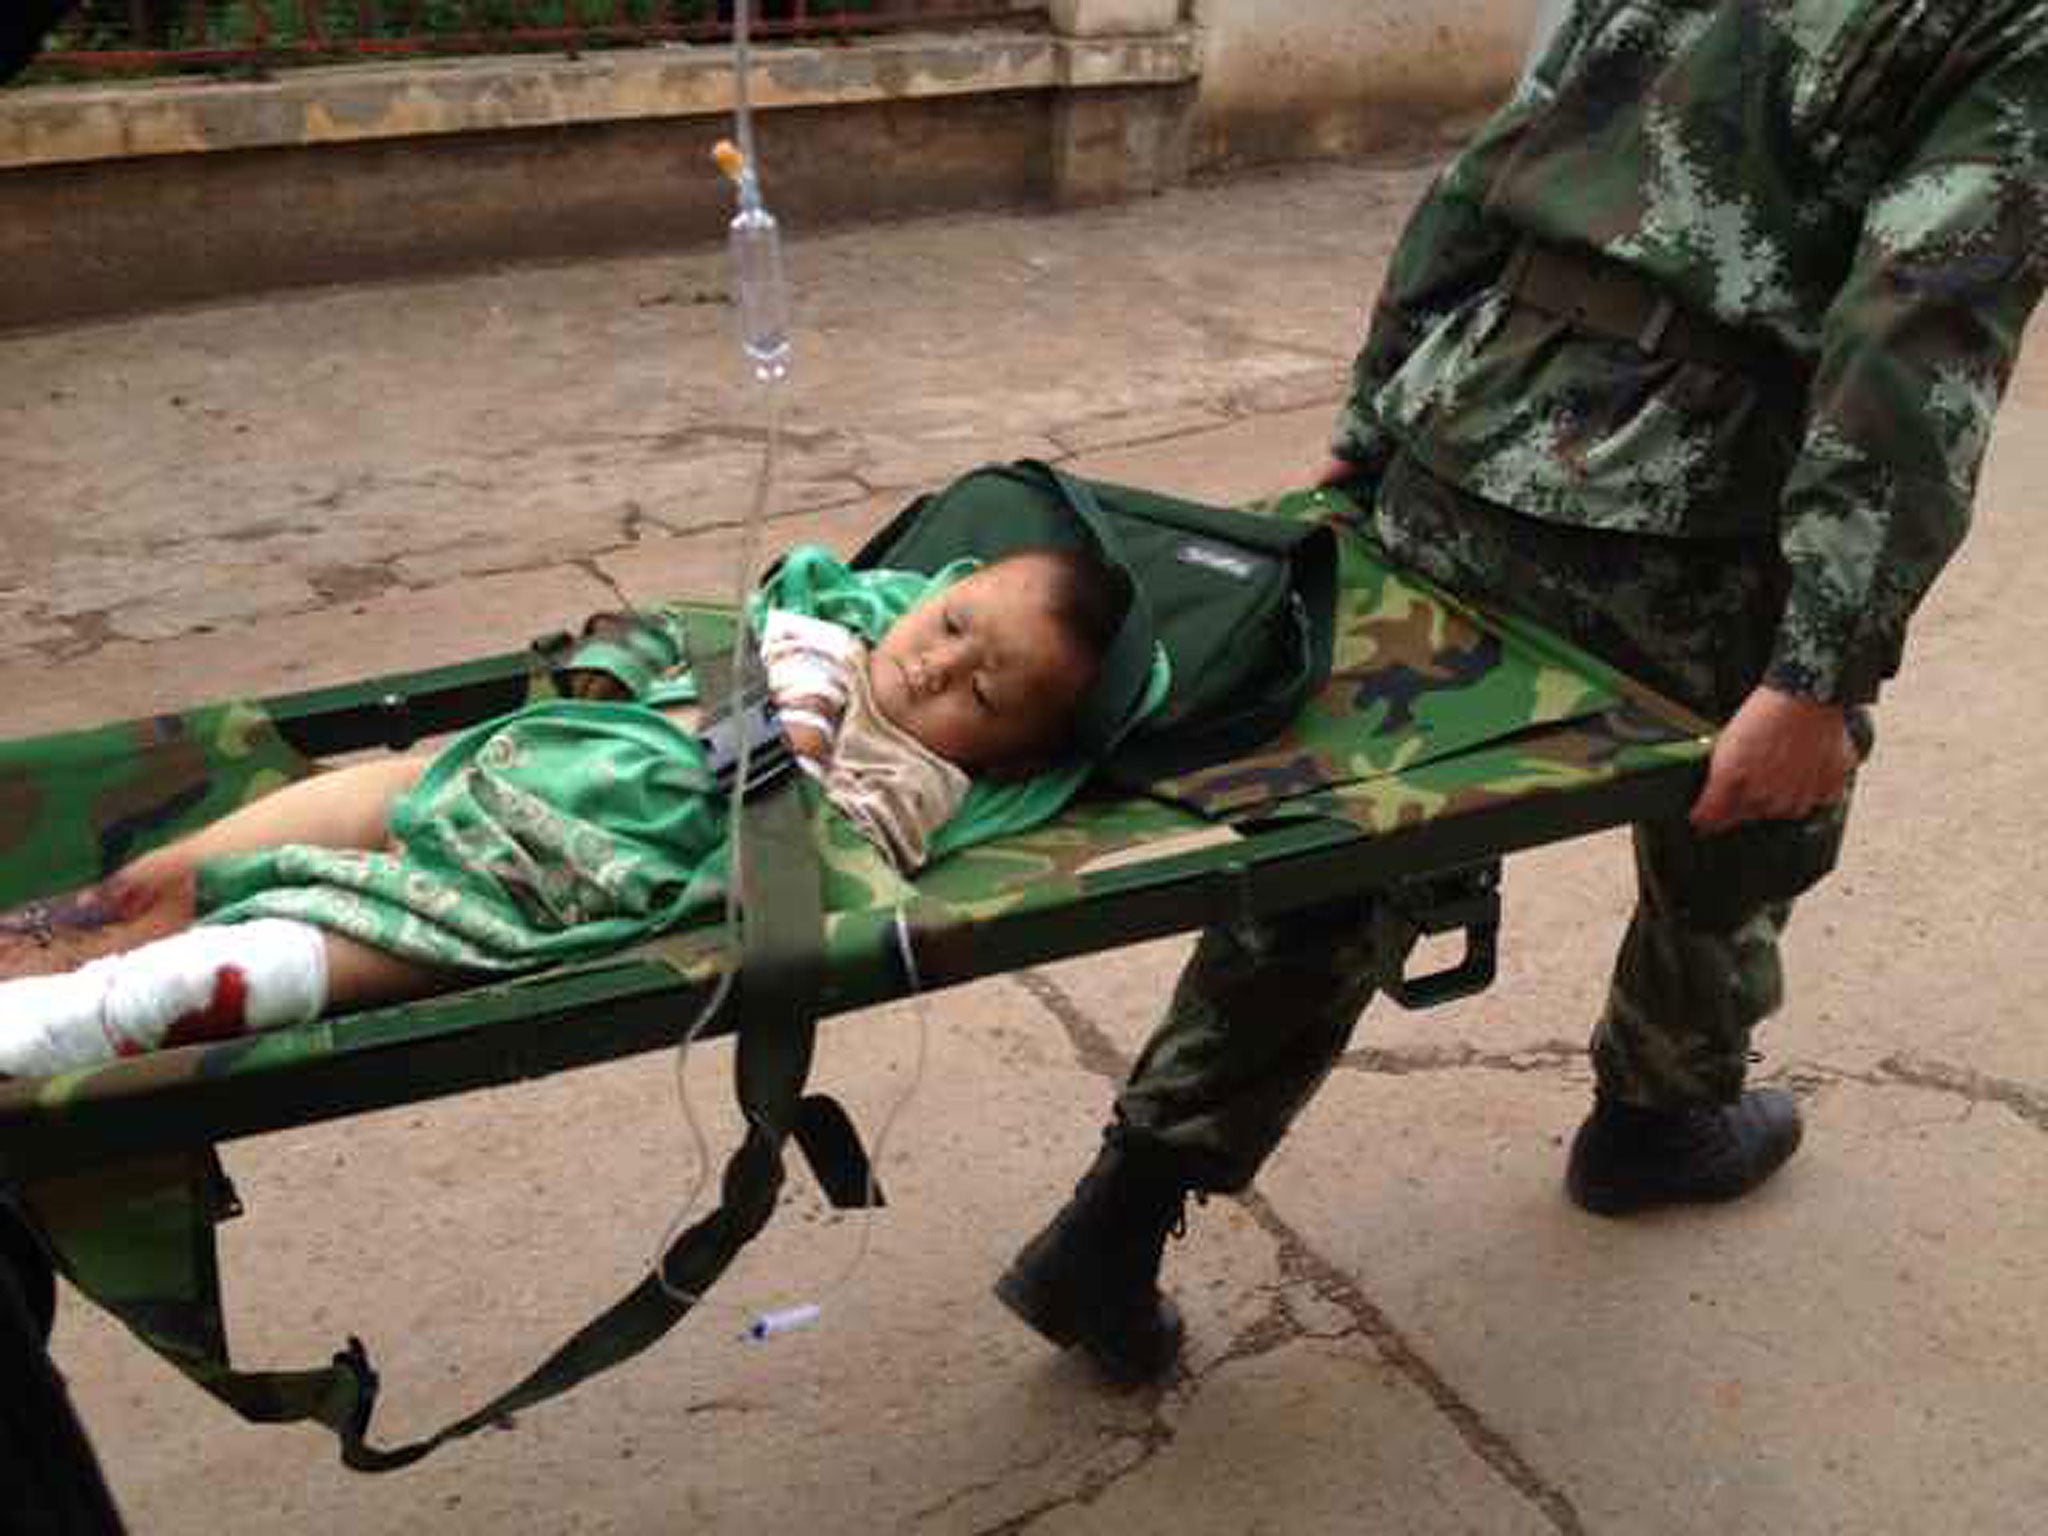 Rescuers carry an injuried child on a stretcher after a 6.1 magnitude earthquake hit the area in Ludian county